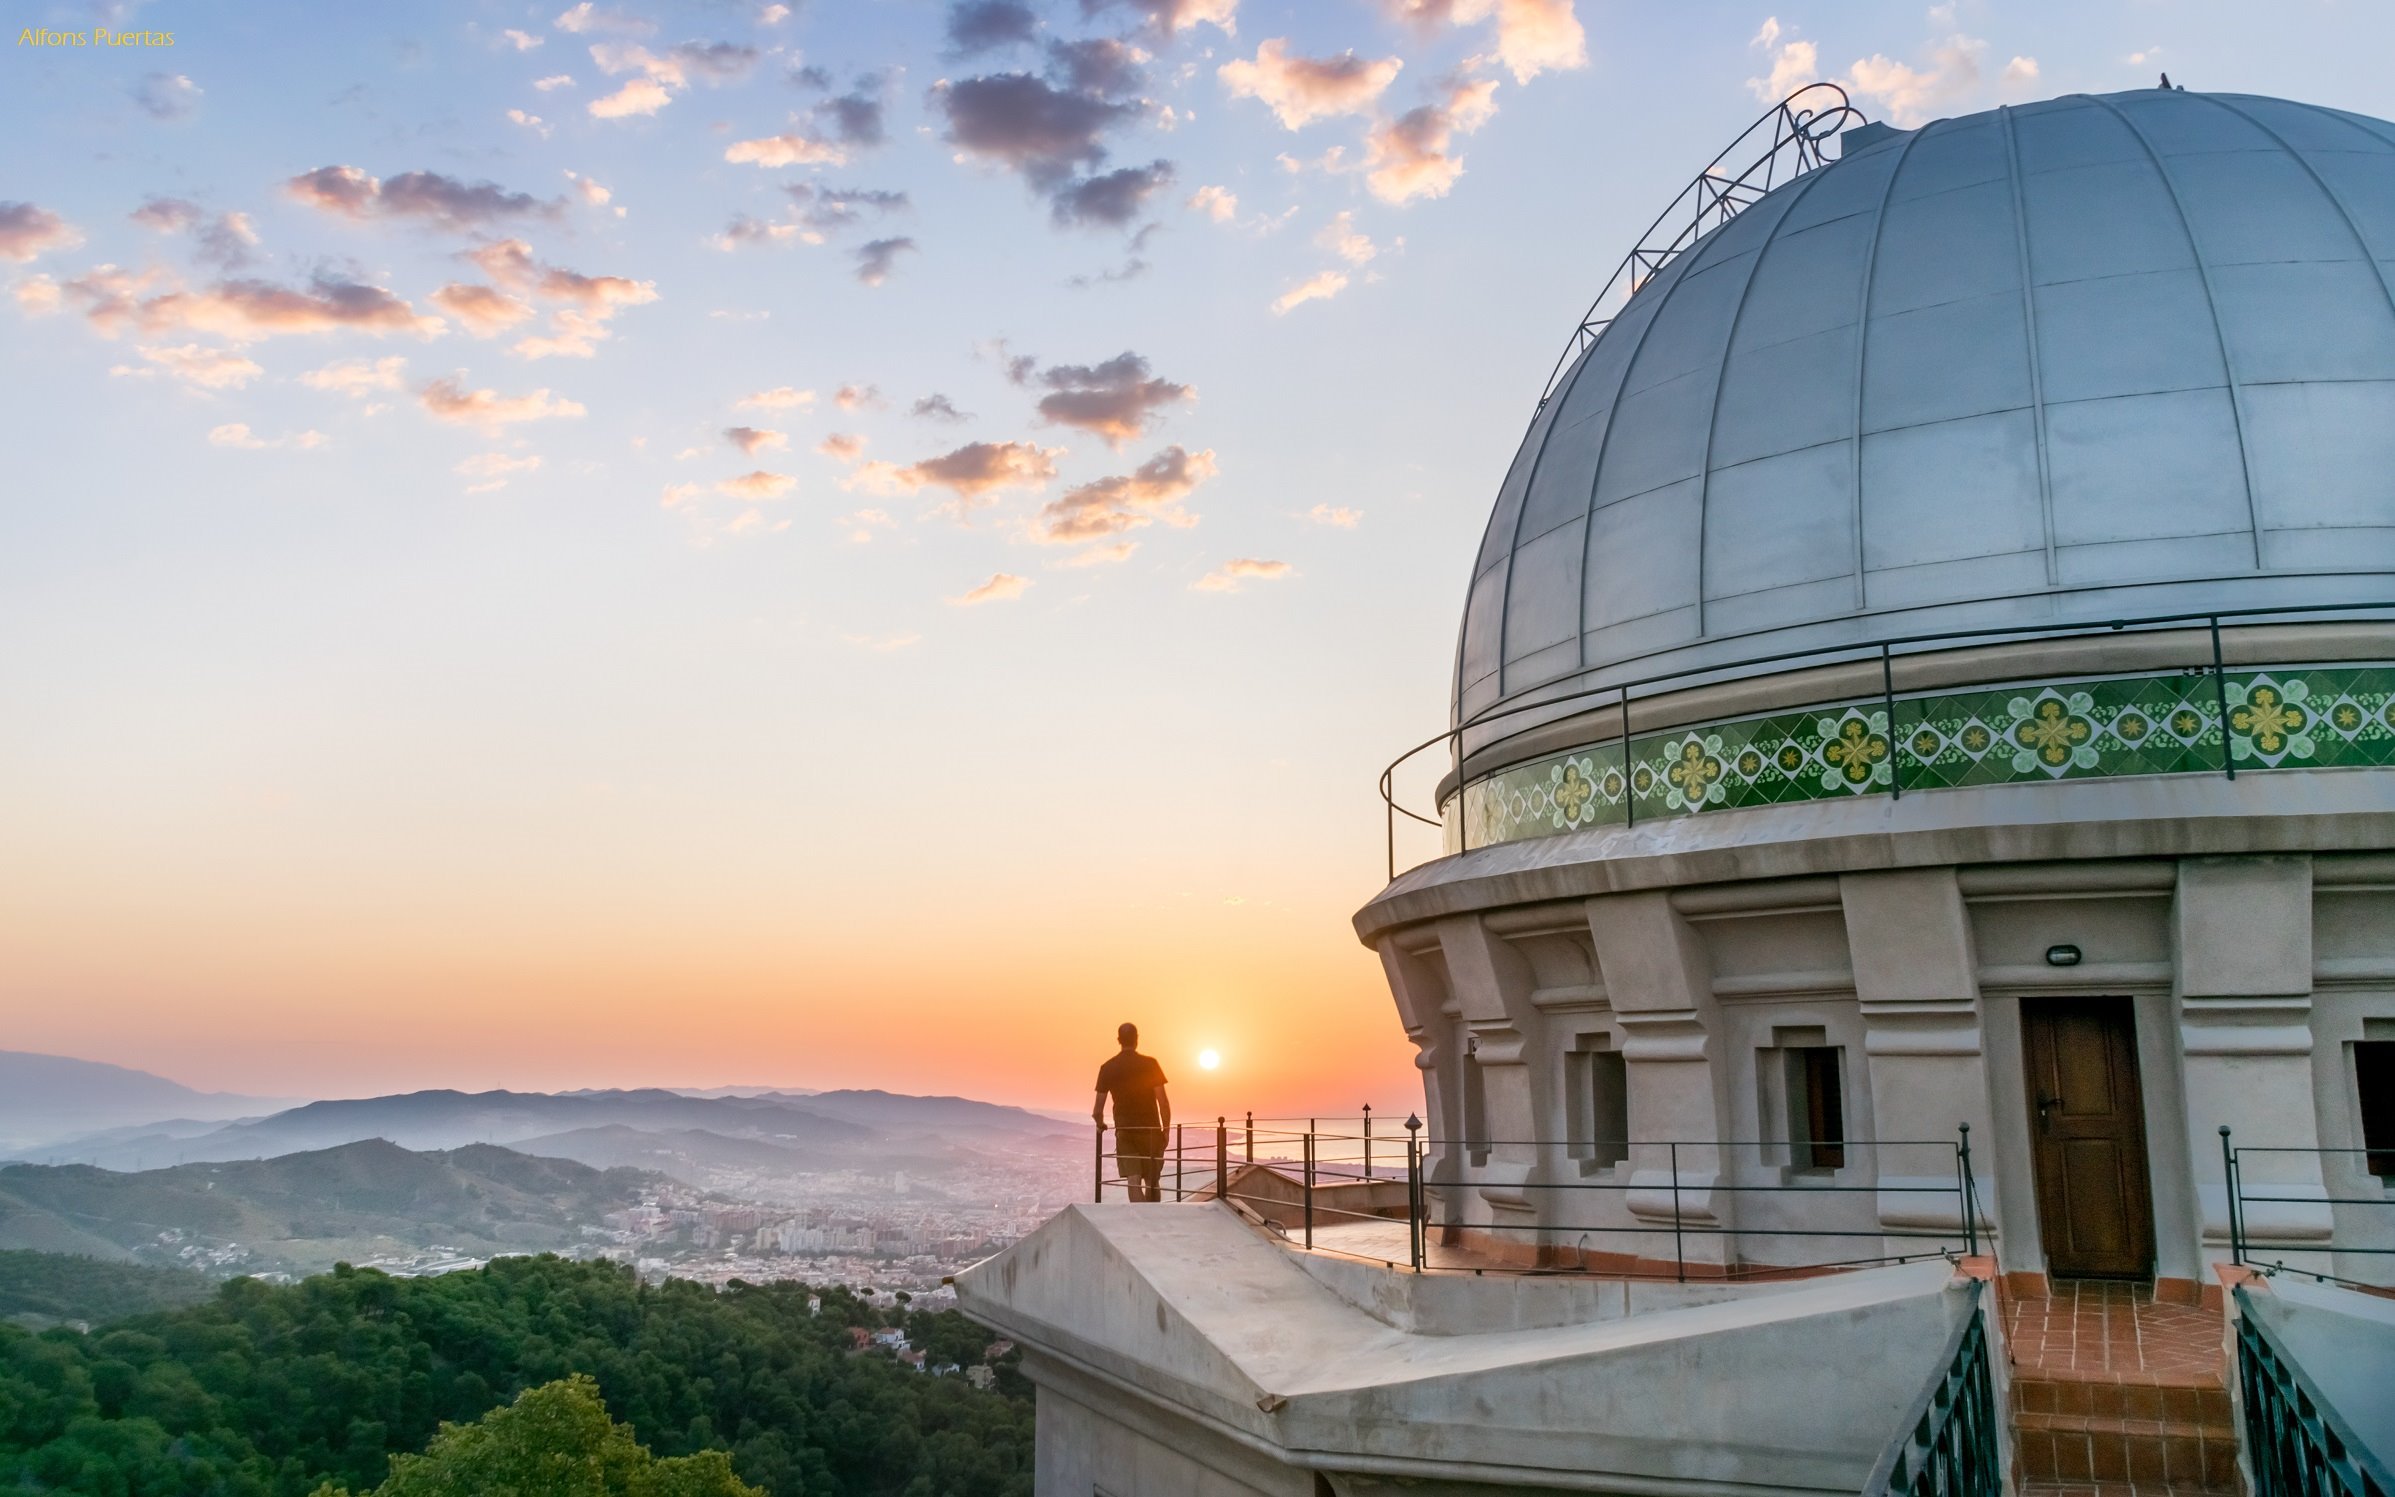 Watching the Sun rise from Fabra Observatory Barcelona by Alfons Puertas @alfons_pc